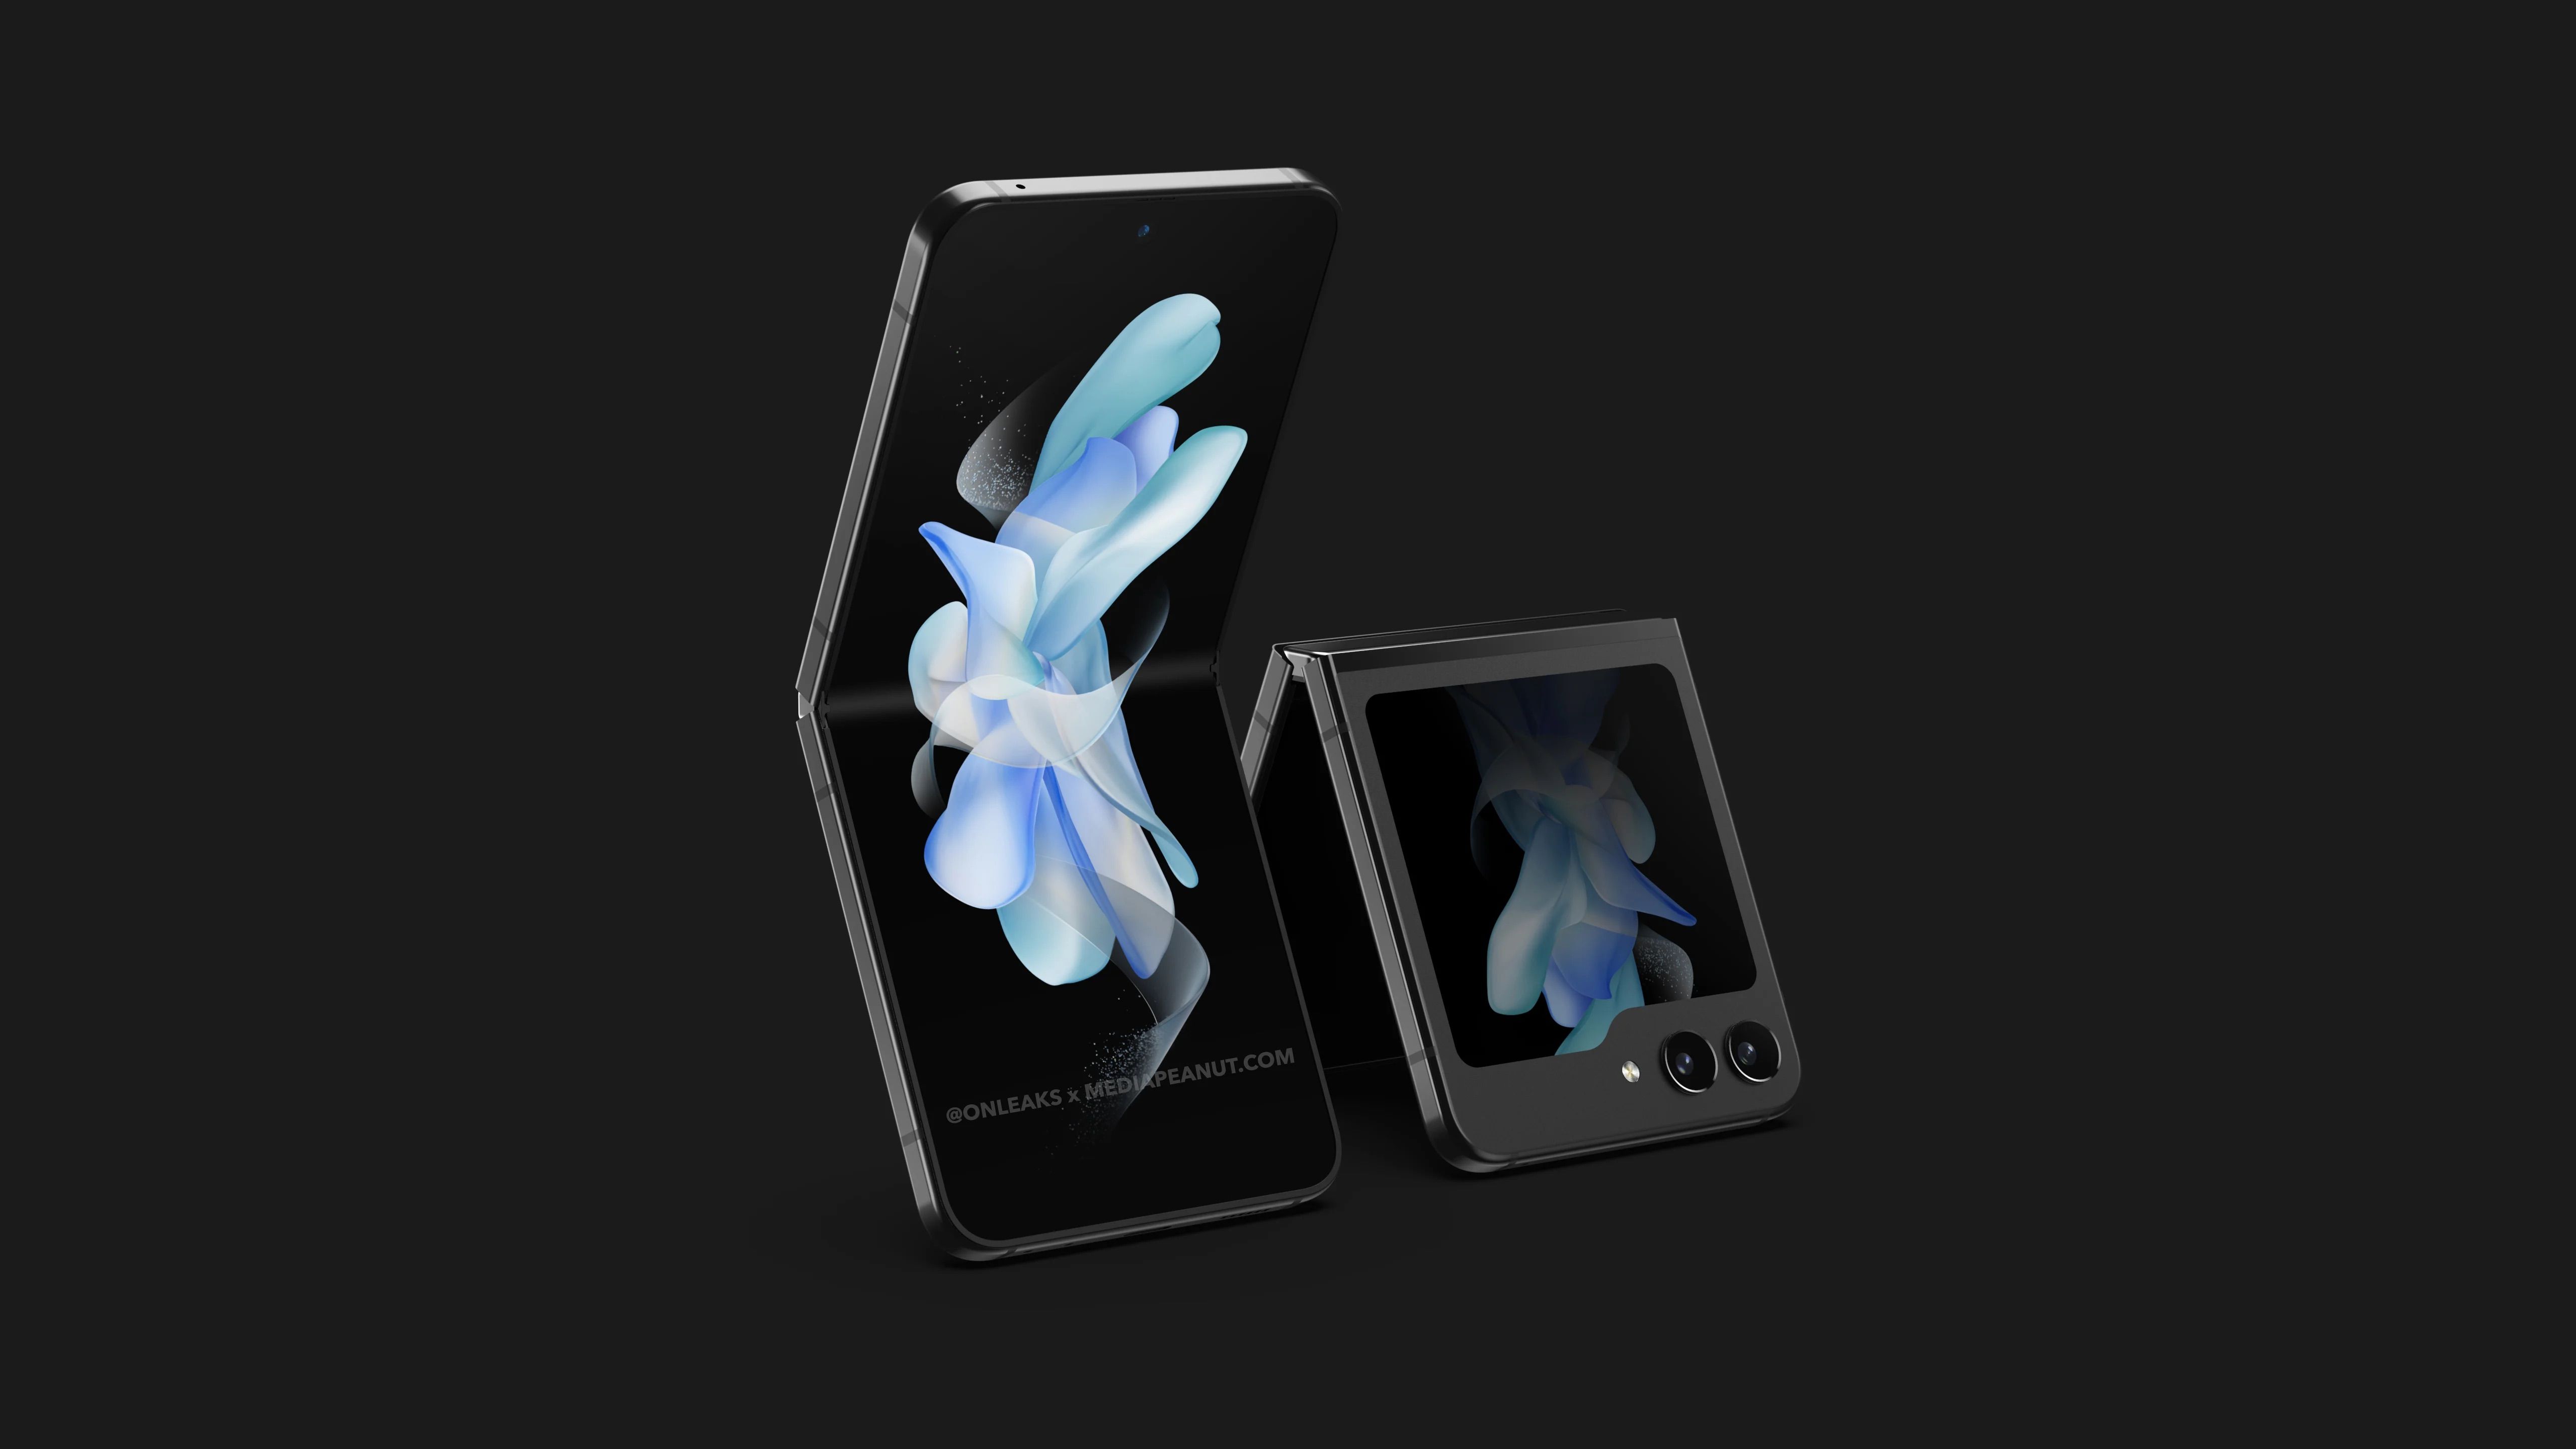 Samsung Galaxy Z Flip 5 in pairs, with one showing the foldable display and the other showing off the new outer cover display 